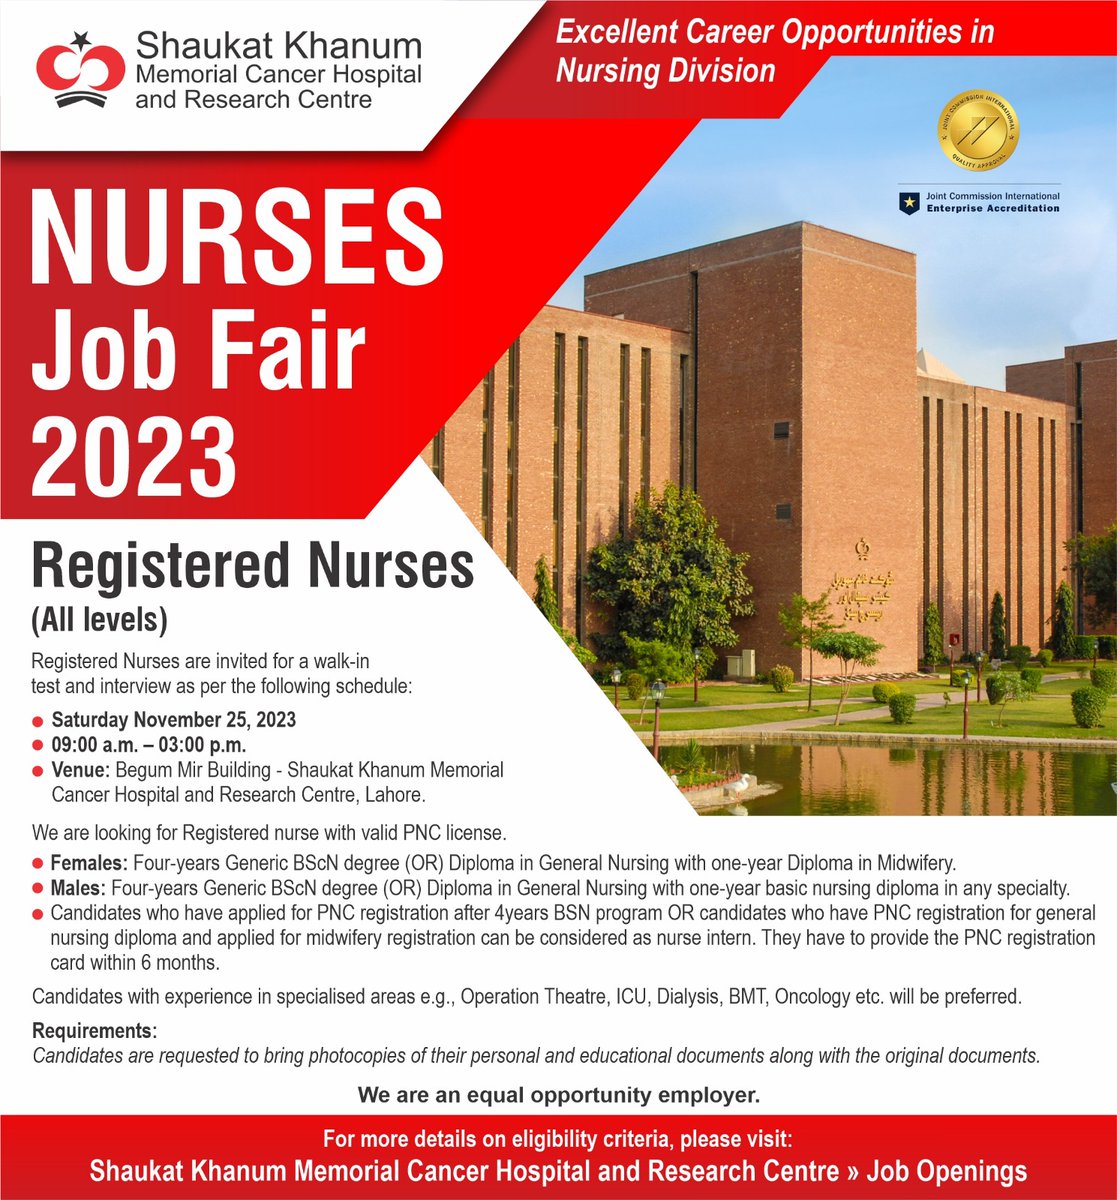 Excellent Career Opportunities for Registered Nurses (All Levels)
We're inviting Registered Nurses to a walk-in test and interview on:
📅 Saturday, November 25, 2023
🕒 09:00 AM – 03:00 PM
🏢 Begum Mir Building, SKMCH&RC, Lahore

#NursingJobs #SKMCH #JobsInLahore